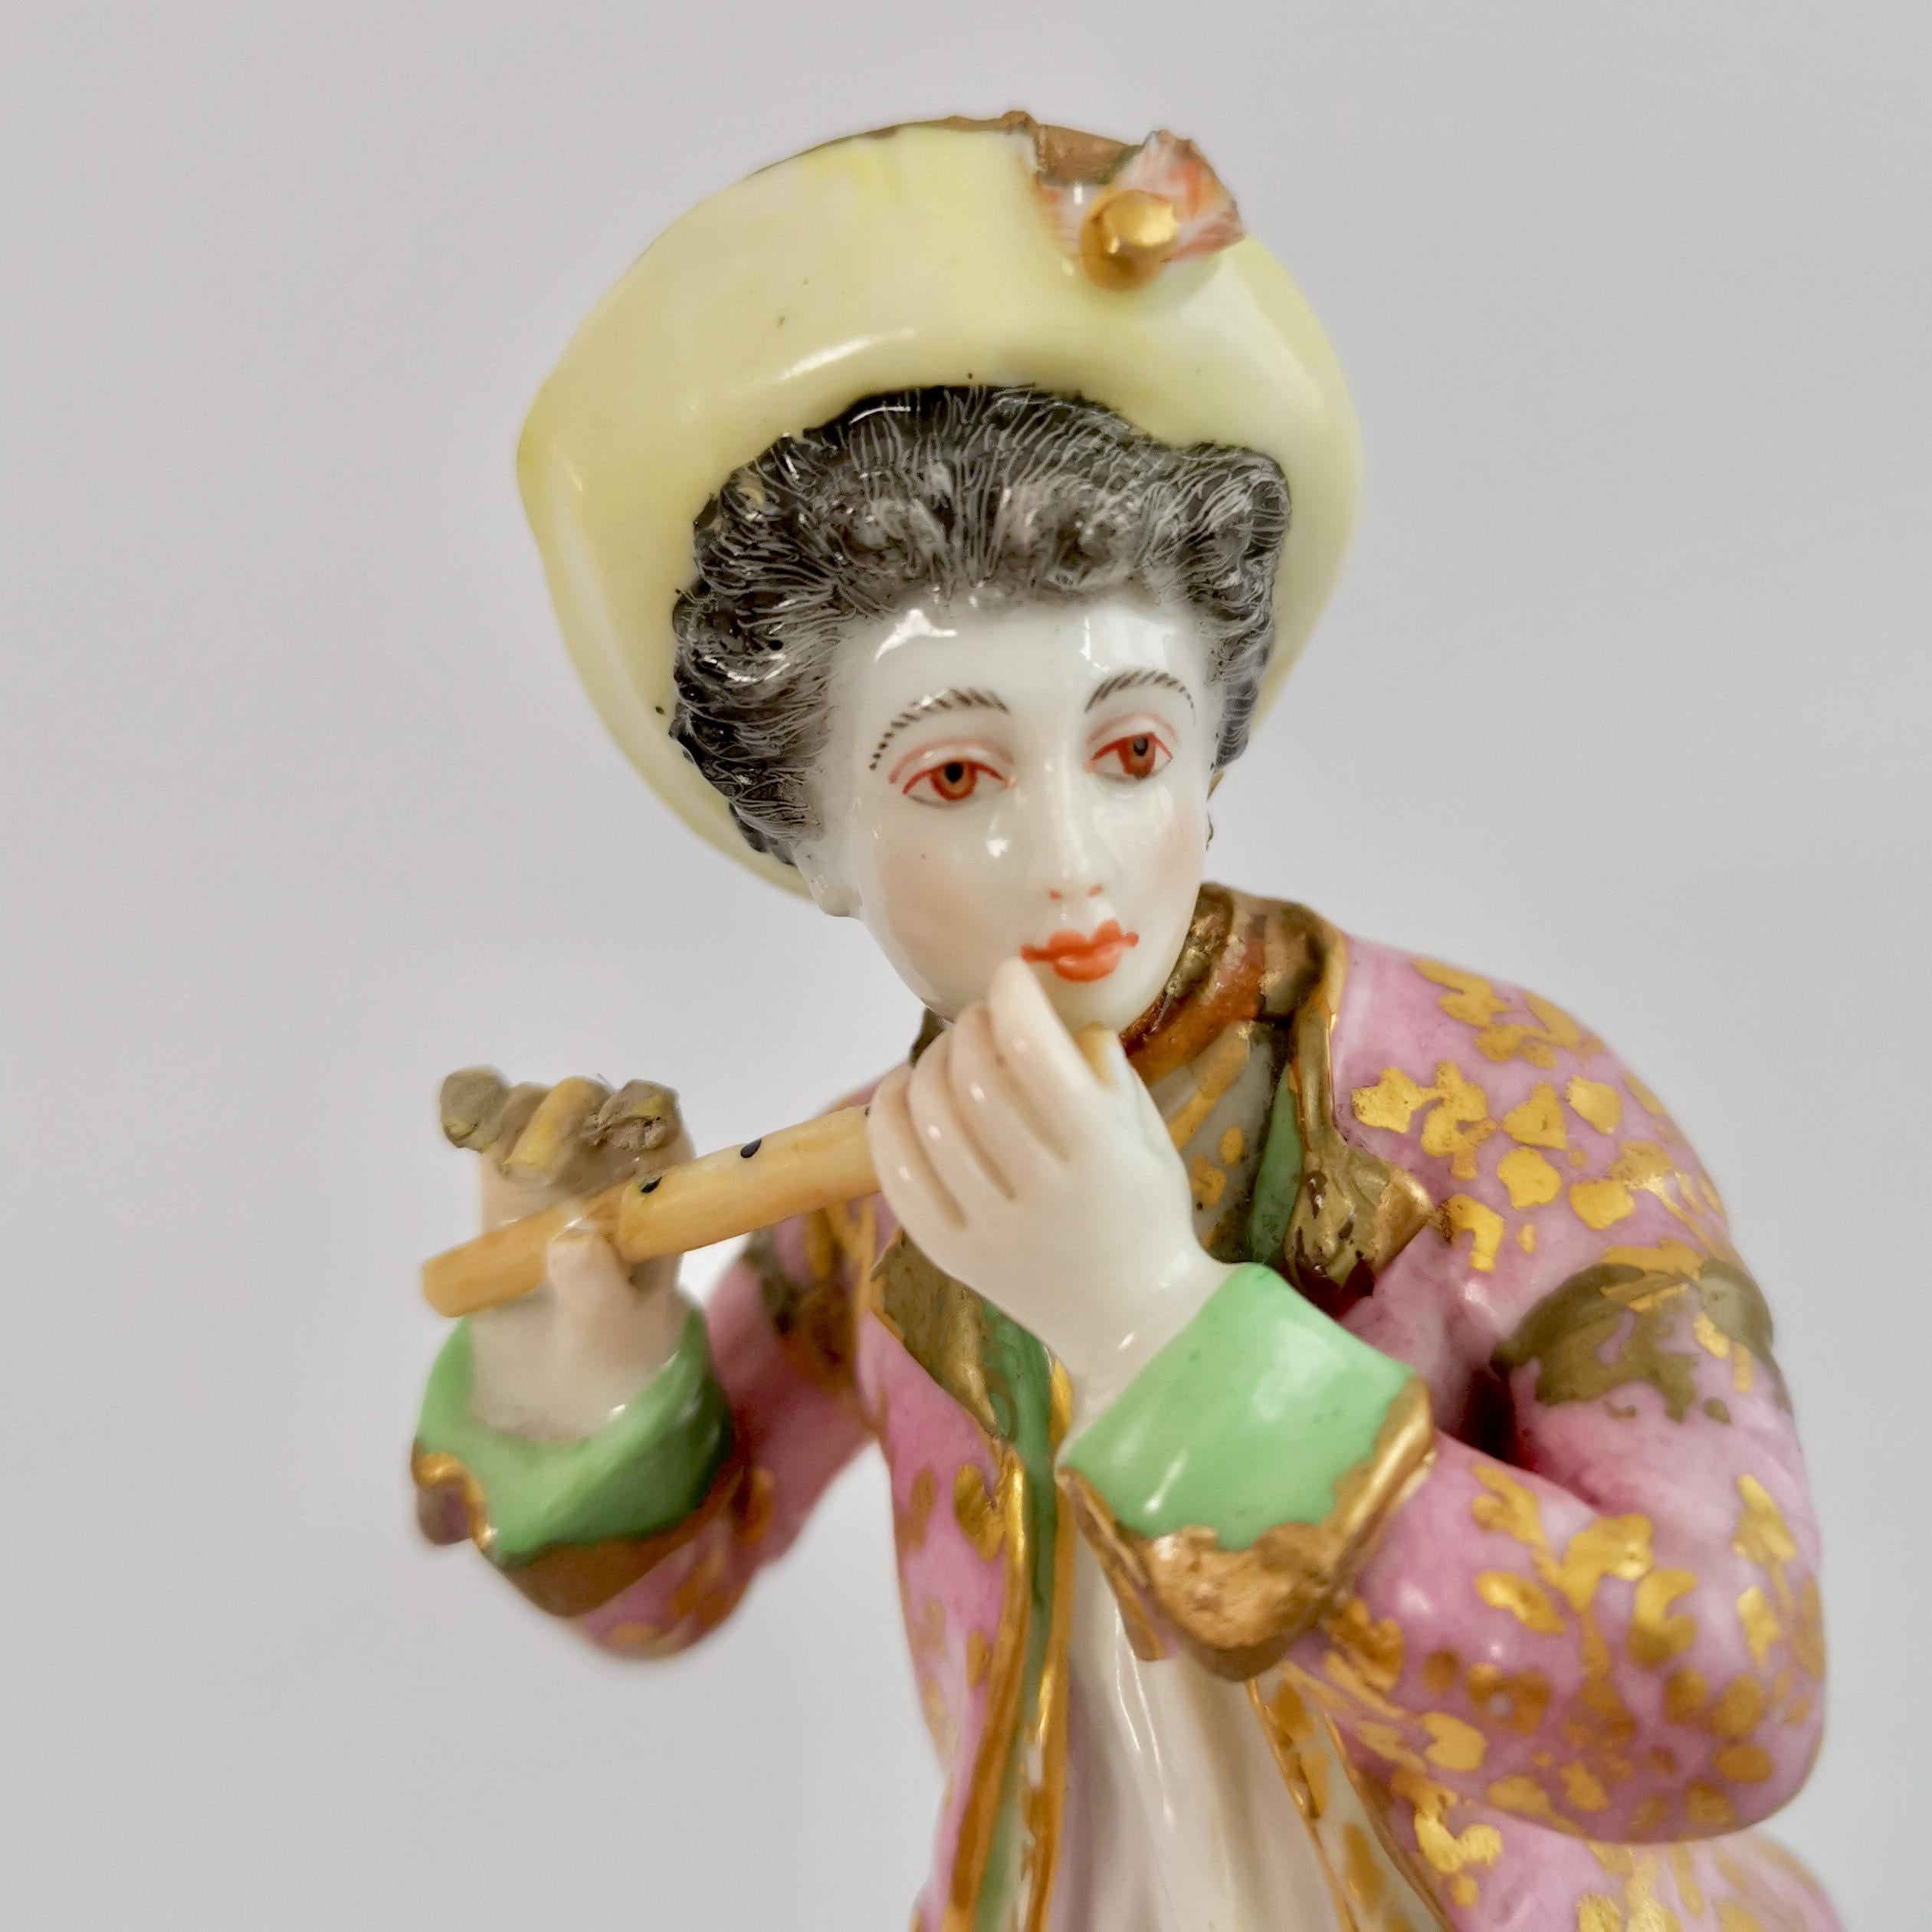 Hand-Painted Edmé Samson Porcelain Figure of Piper, Rococo Chelsea style, 19th Century